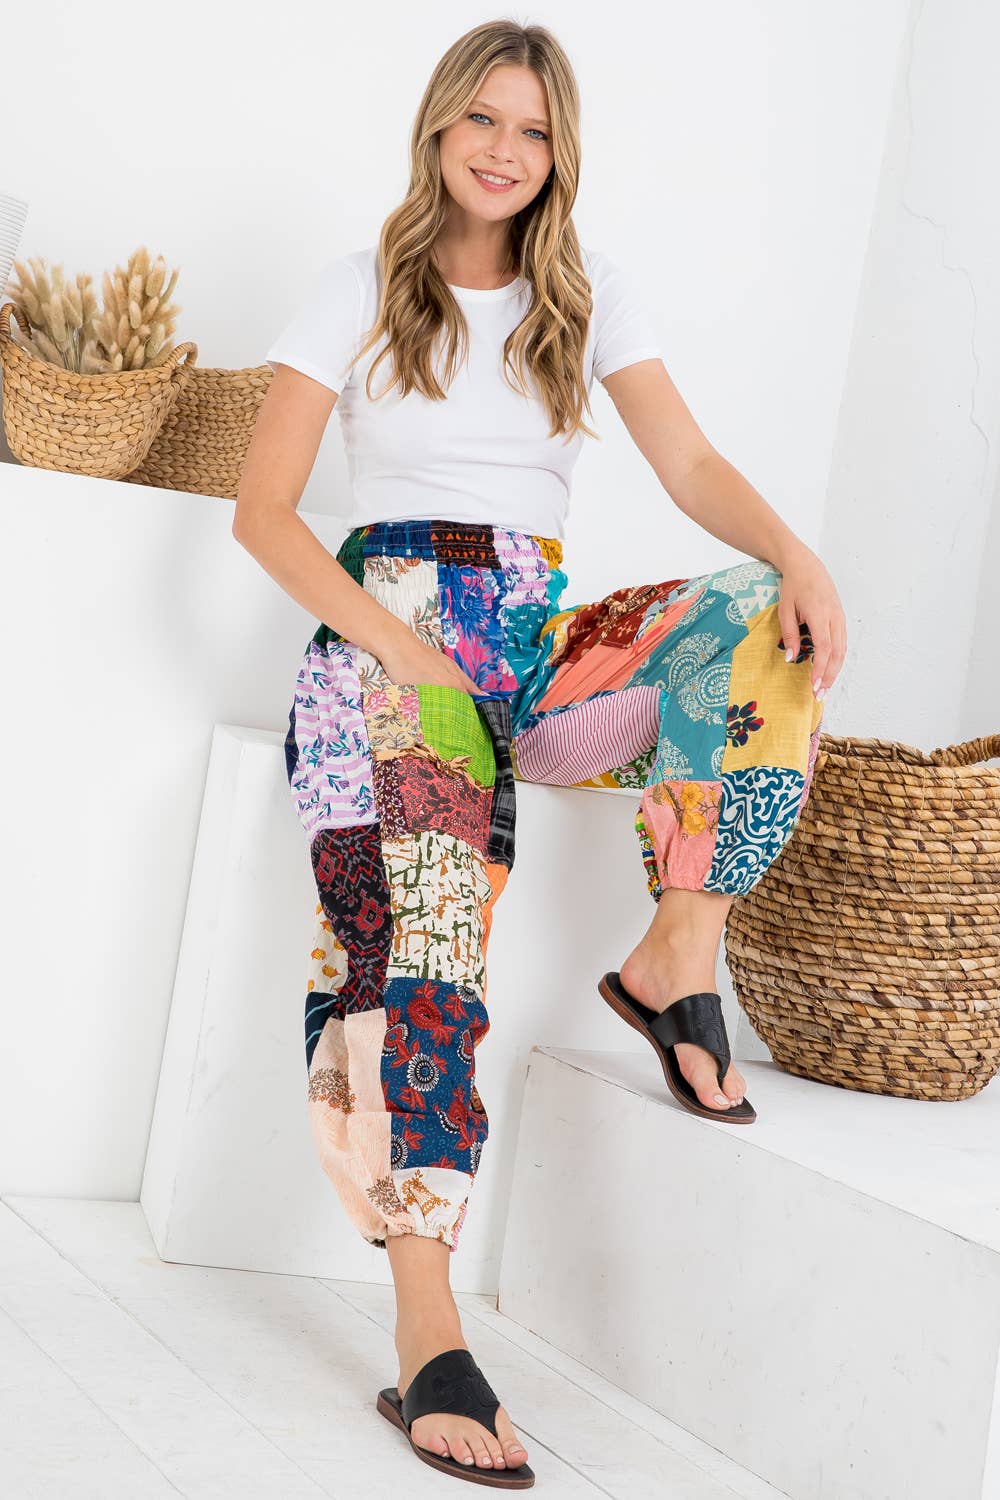 Purchase Wholesale patchwork pants. Free Returns & Net 60 Terms on